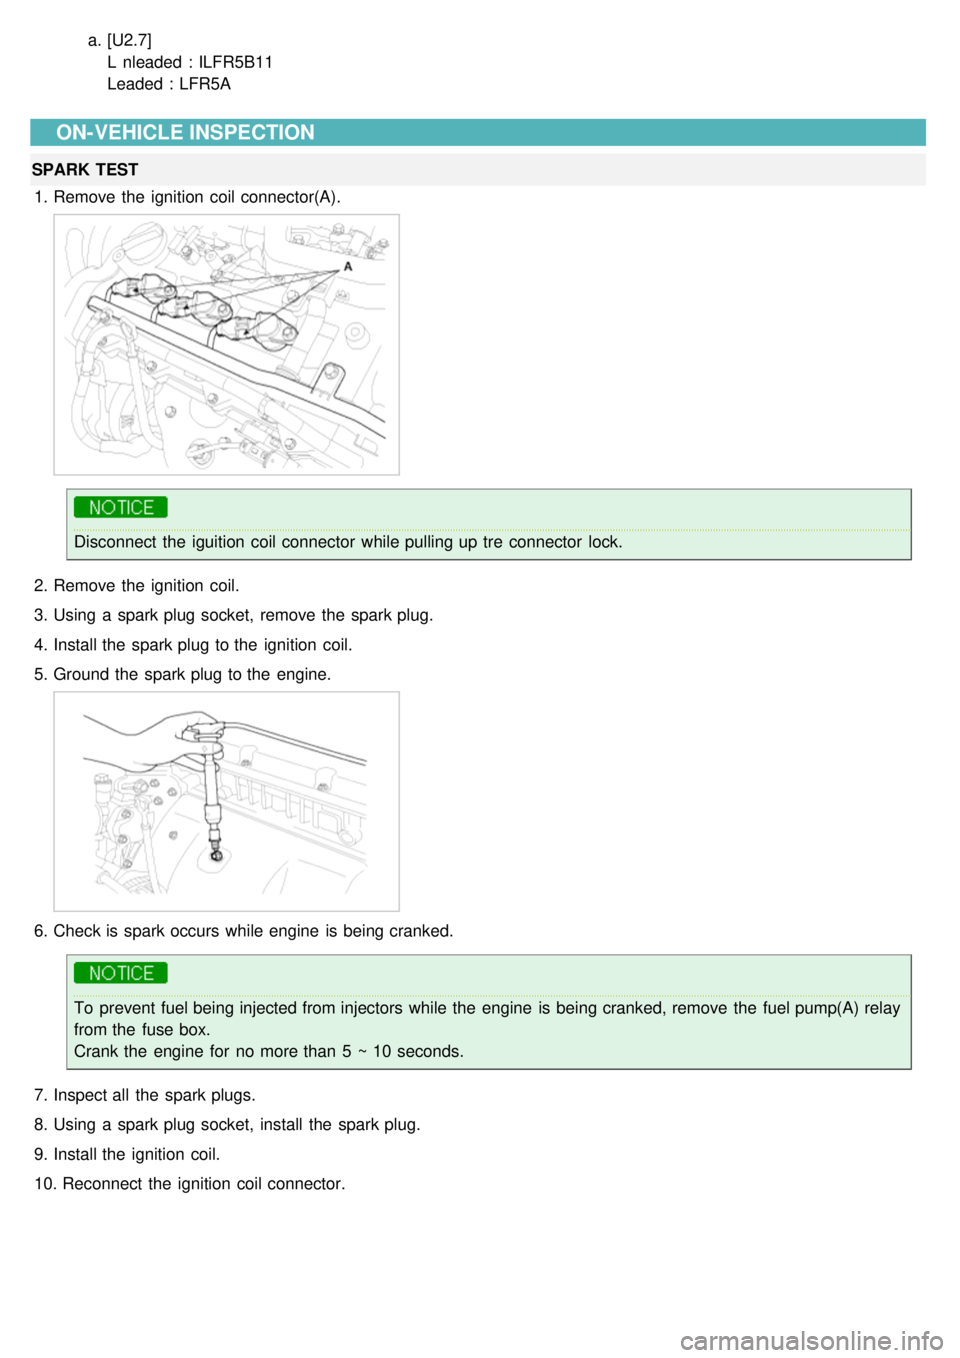 KIA CARNIVAL 2007  Workshop Manual a.[U2.7]
L  nleaded  : ILFR5B11
Leaded : LFR5A
ON-VEHICLE INSPECTION
SPARK TEST
1. Remove the  ignition  coil connector(A).
Disconnect  the  iguition  coil connector  while pulling up tre  connector  